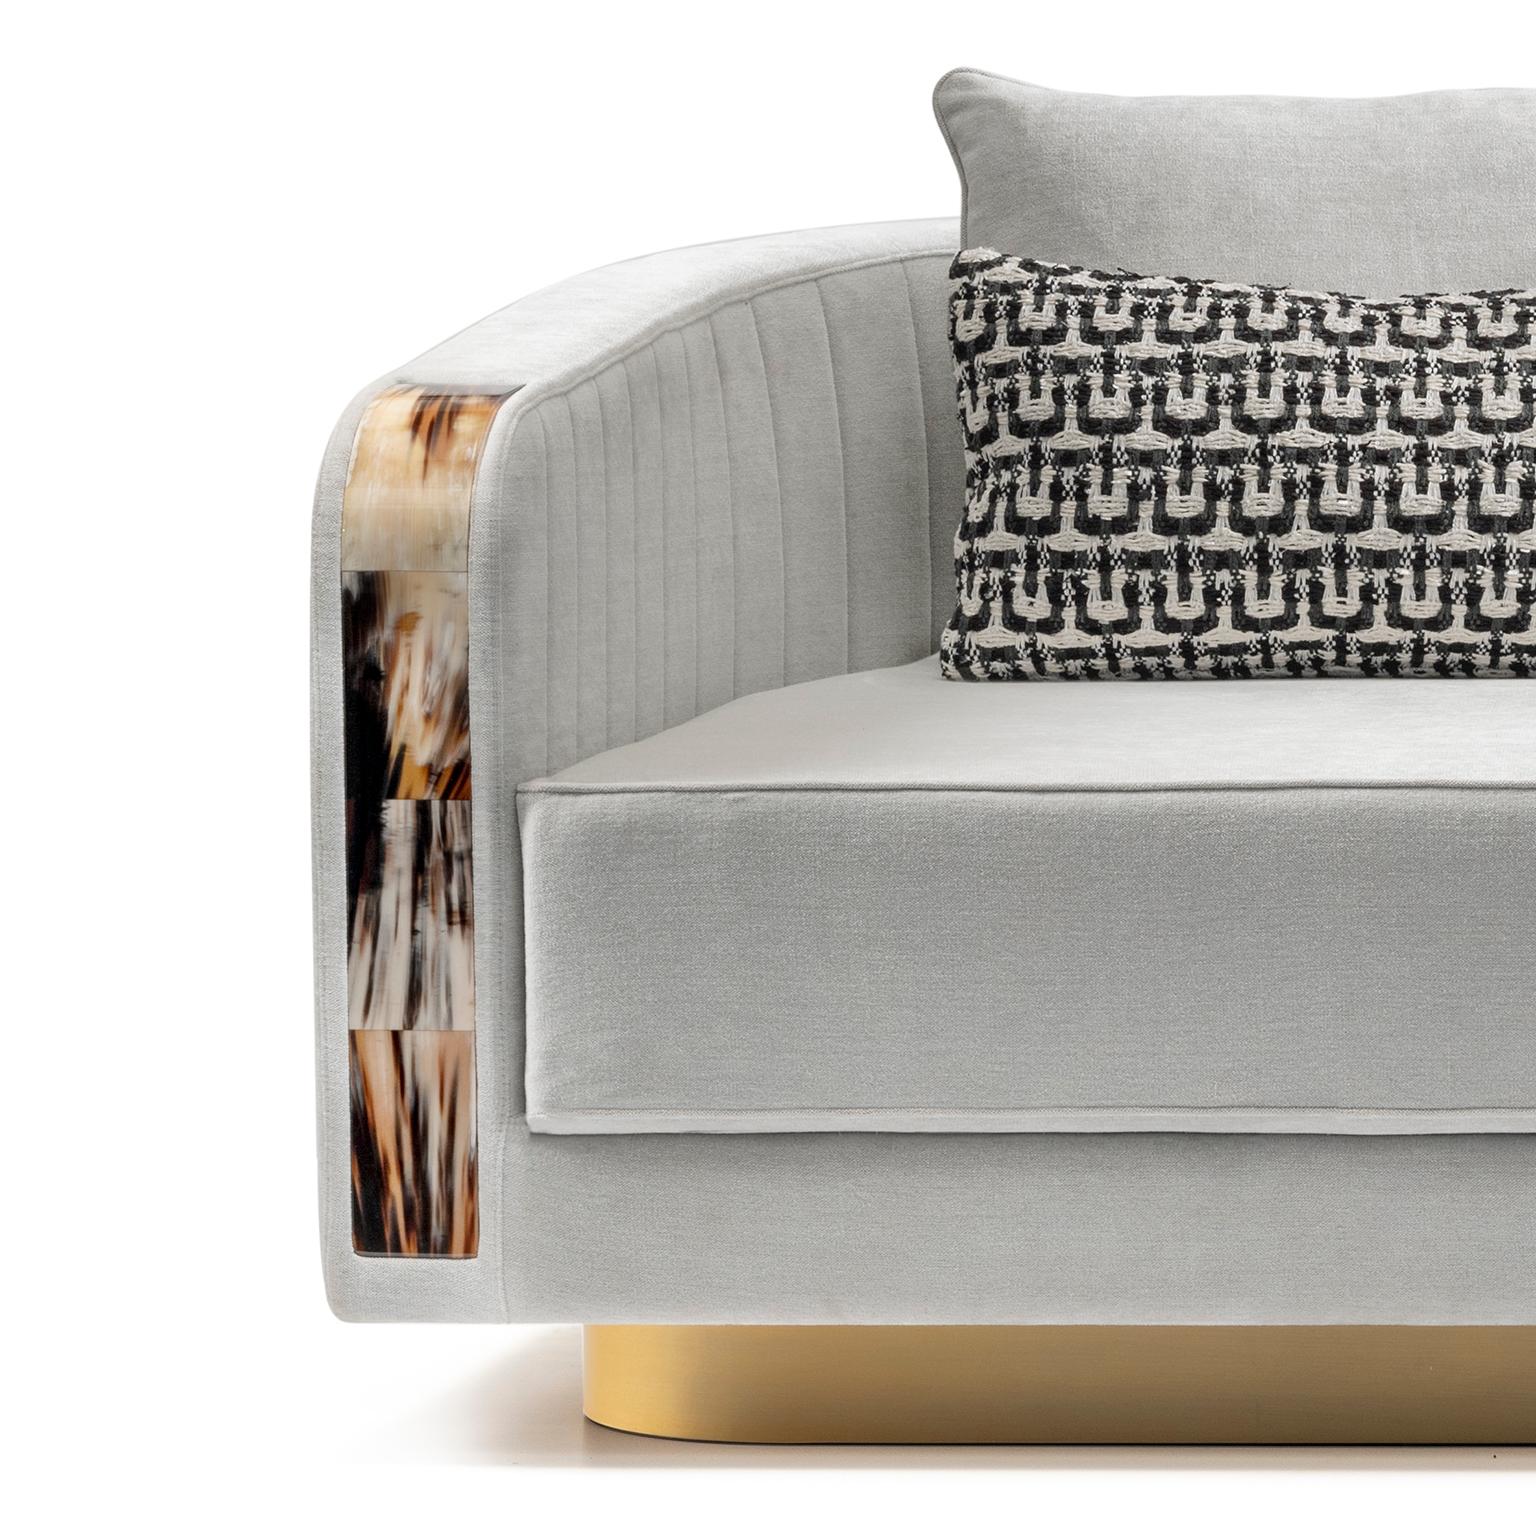 Distinguished by gentle lines and plush materials, Afrodite sofa will imbue your decor scheme with sophistication and class. Curved accents in Corno Italiano create an exquisite textural contrast with the upholstery, quilted with a ribbed motif on